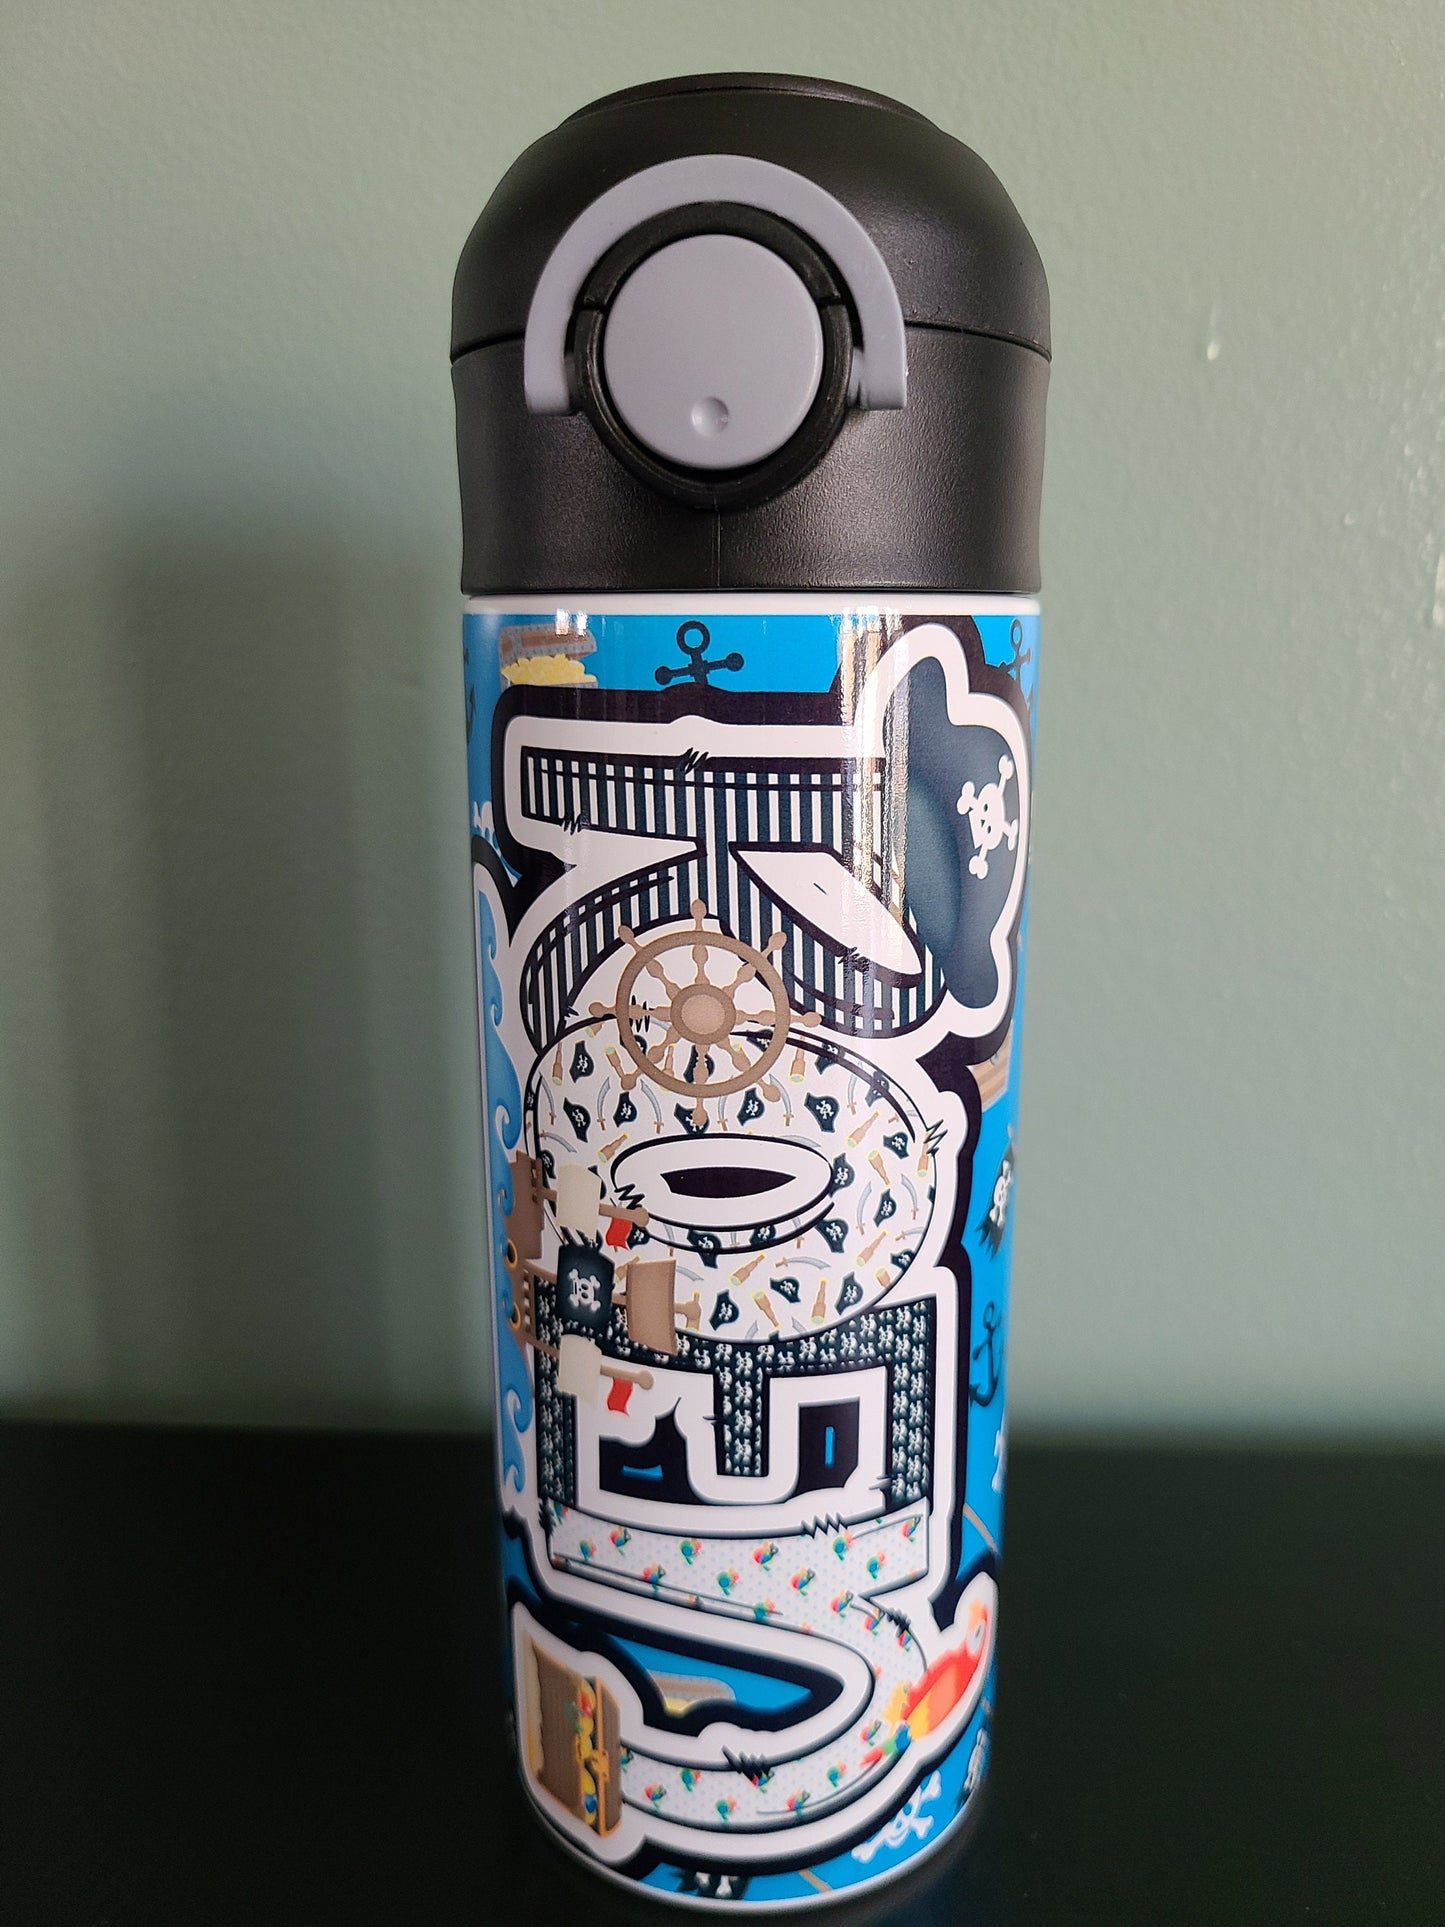 Pirate Personalized Water Bottle